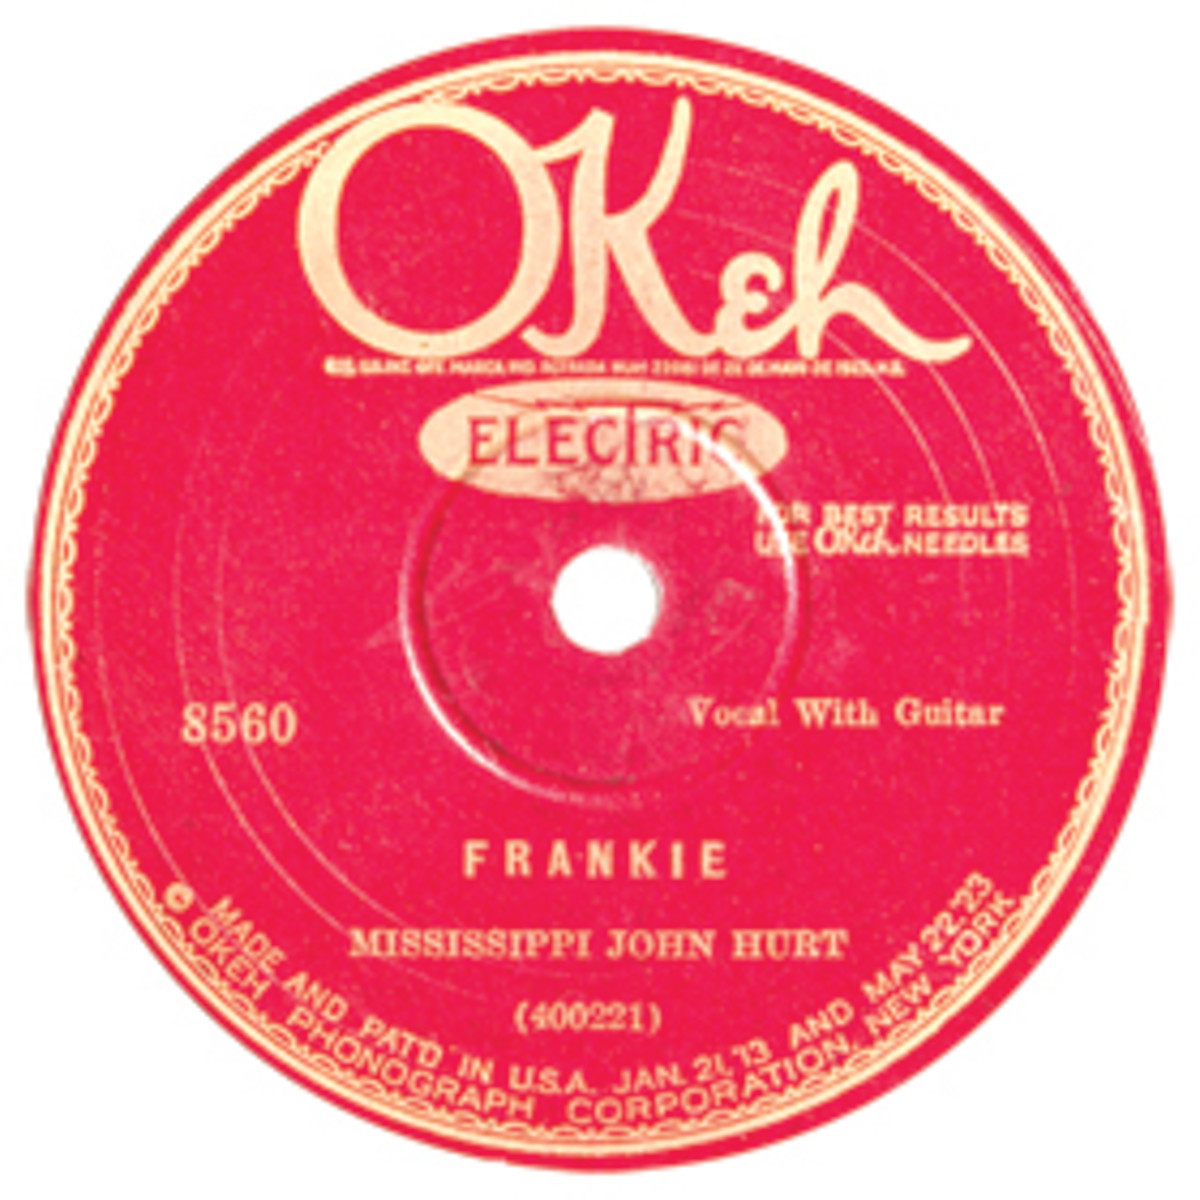 Courtesy Blues IMages, a division of Tefteller’s World’s Rarest Records